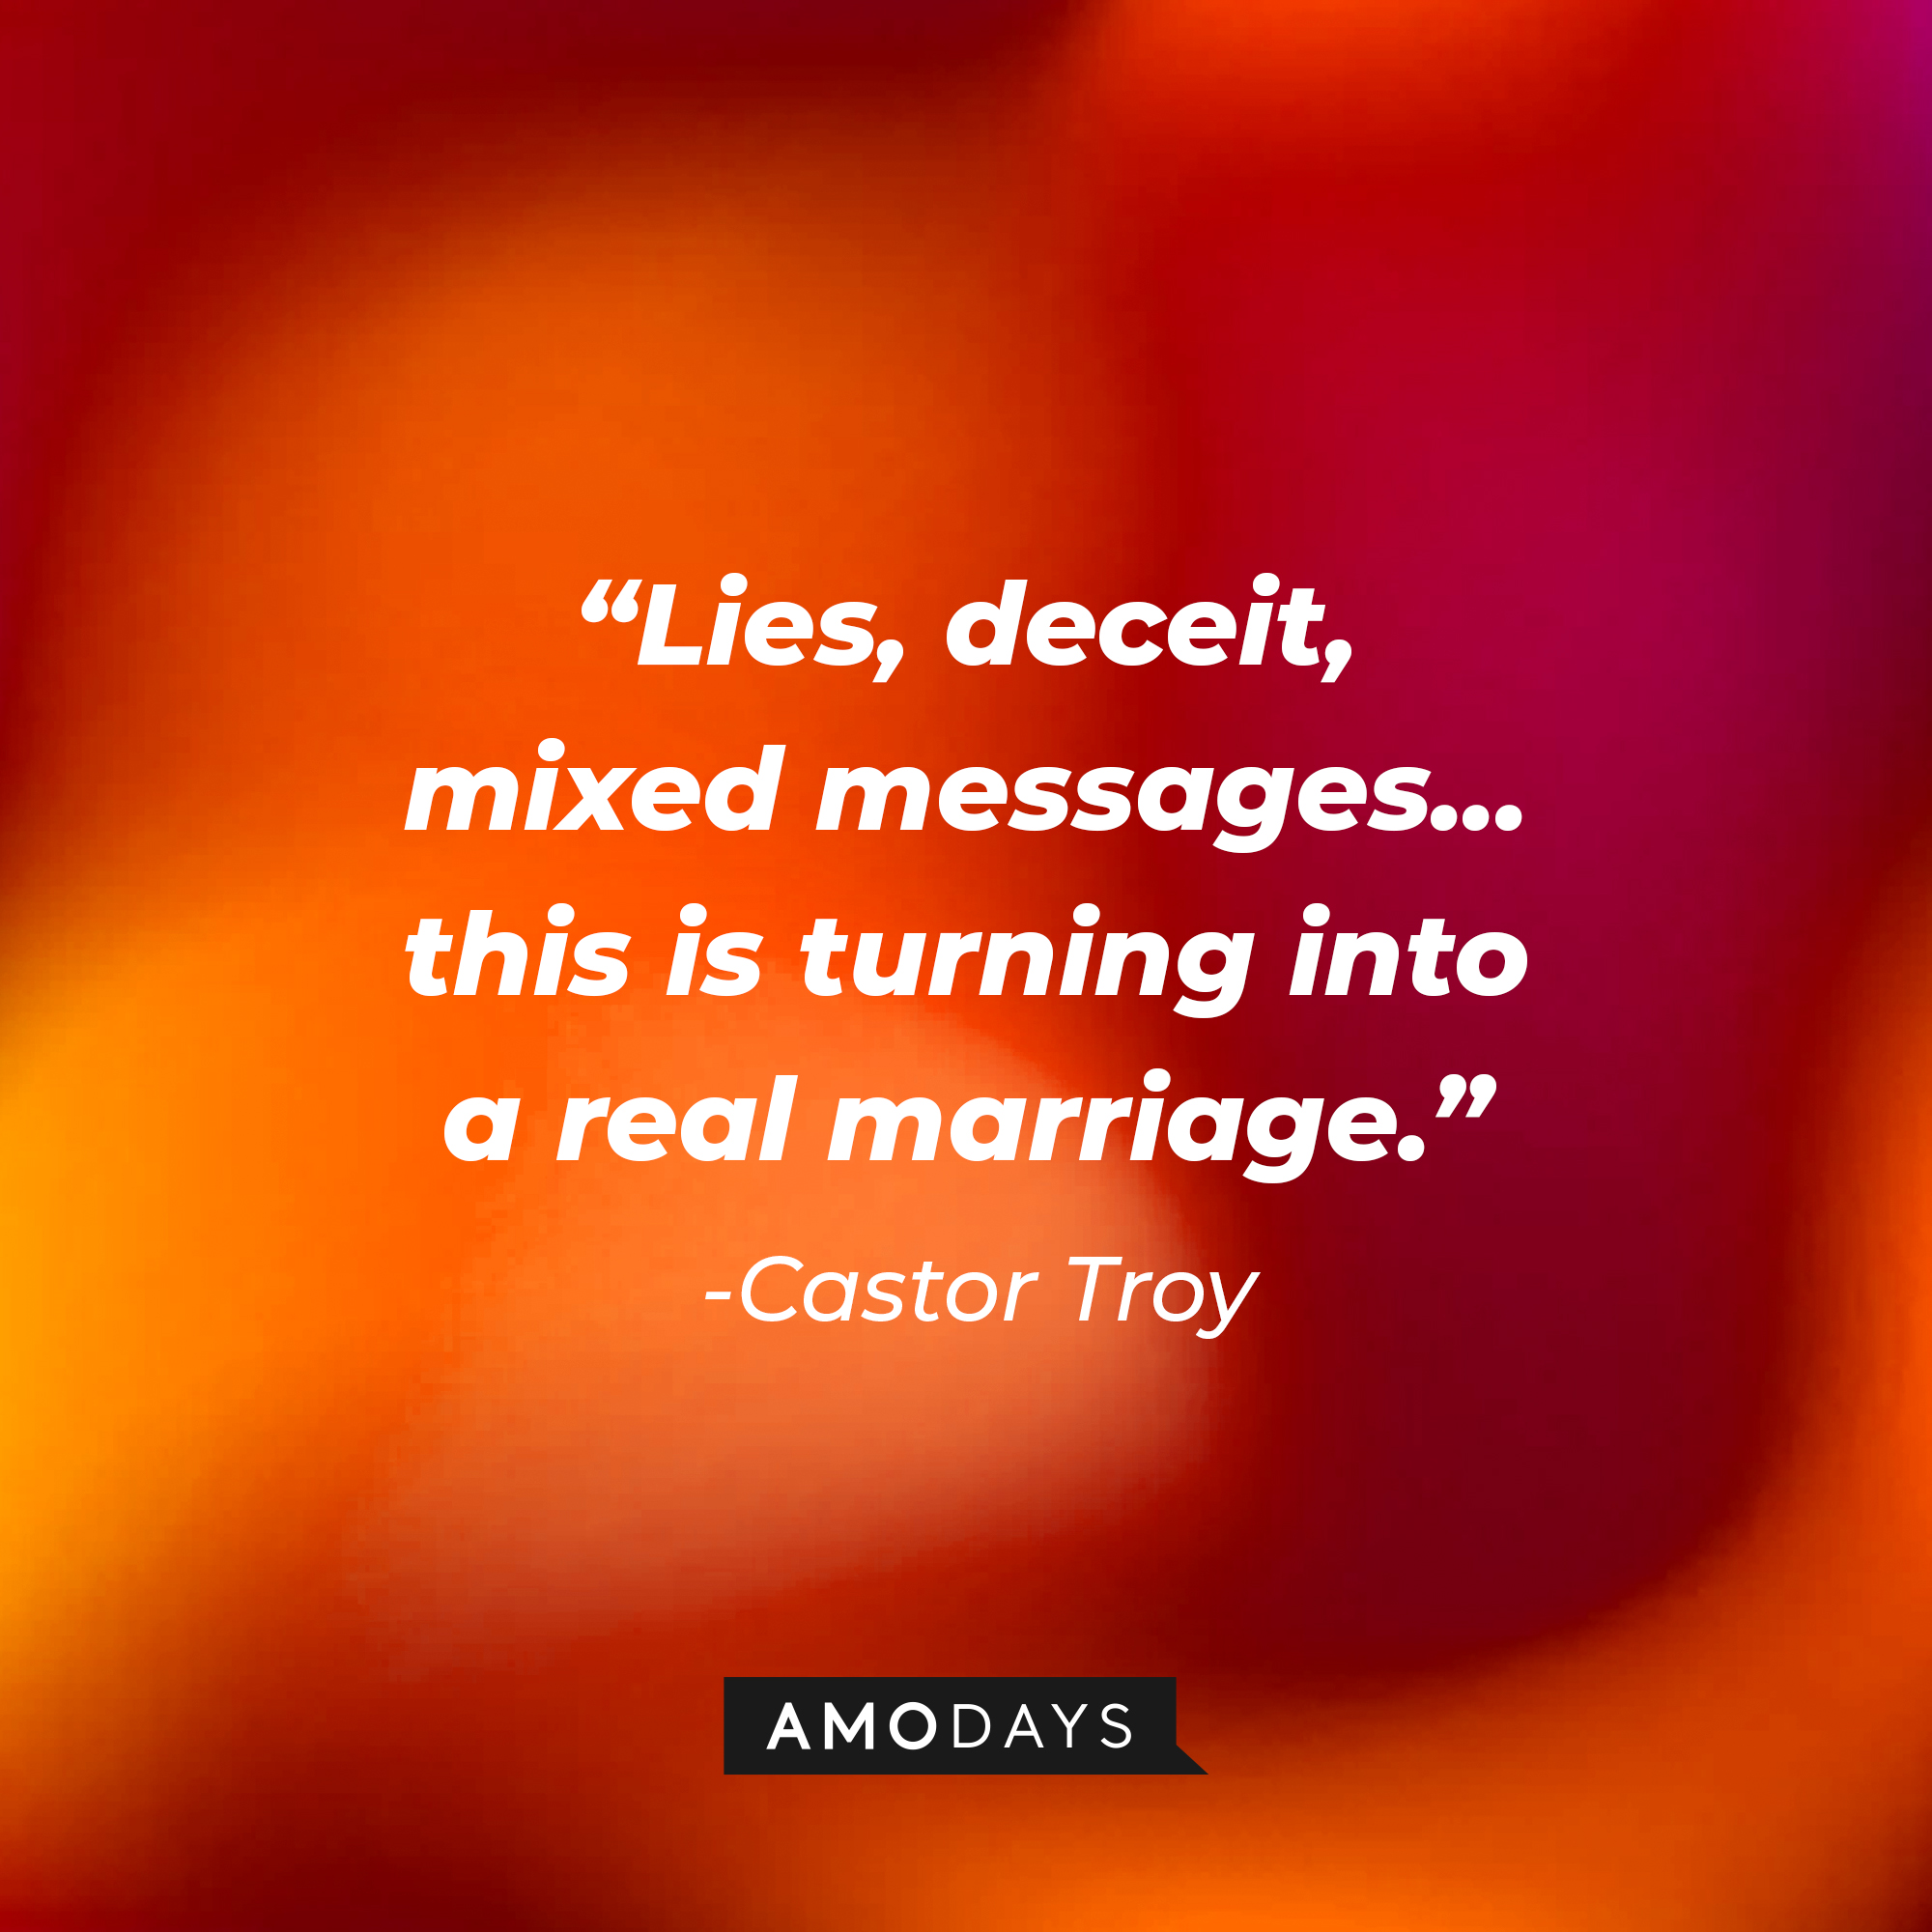 Castor Troy's quote: “Lies, deceit, mixed messages... this is turning into a real marriage.” : Source: Amodays